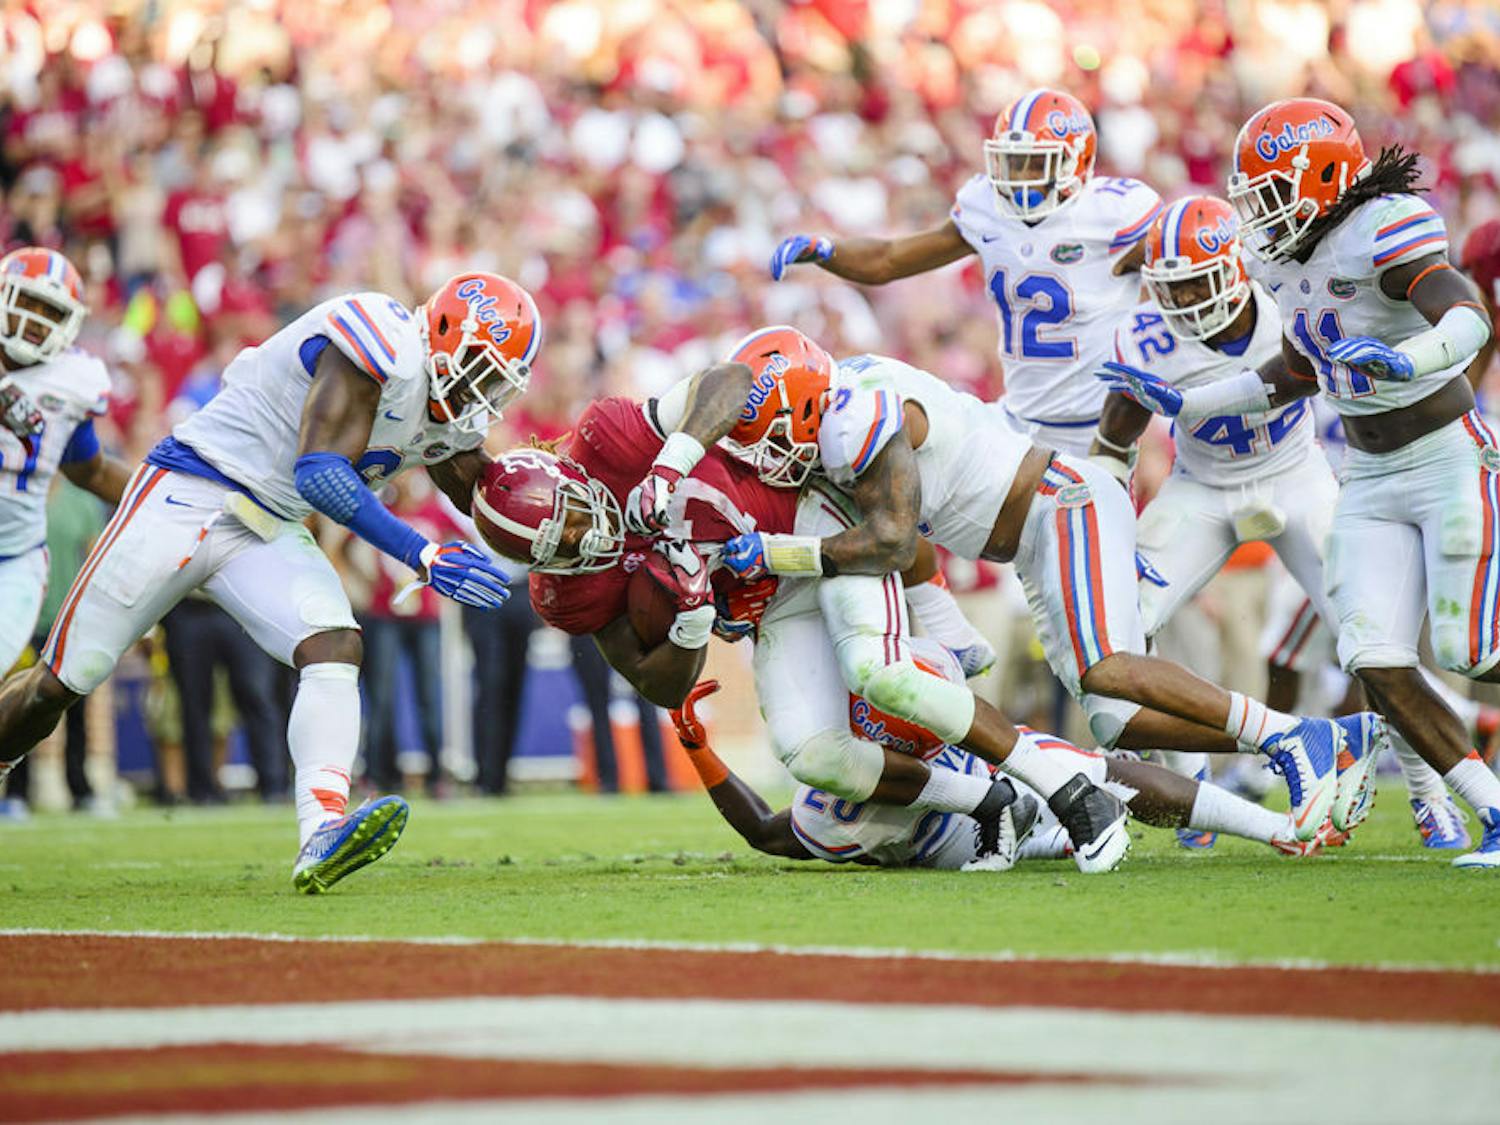 The Gators dropped their first game of the season, losing 42-21 to the Crimson Tide at Bryant-Denny Stadium.